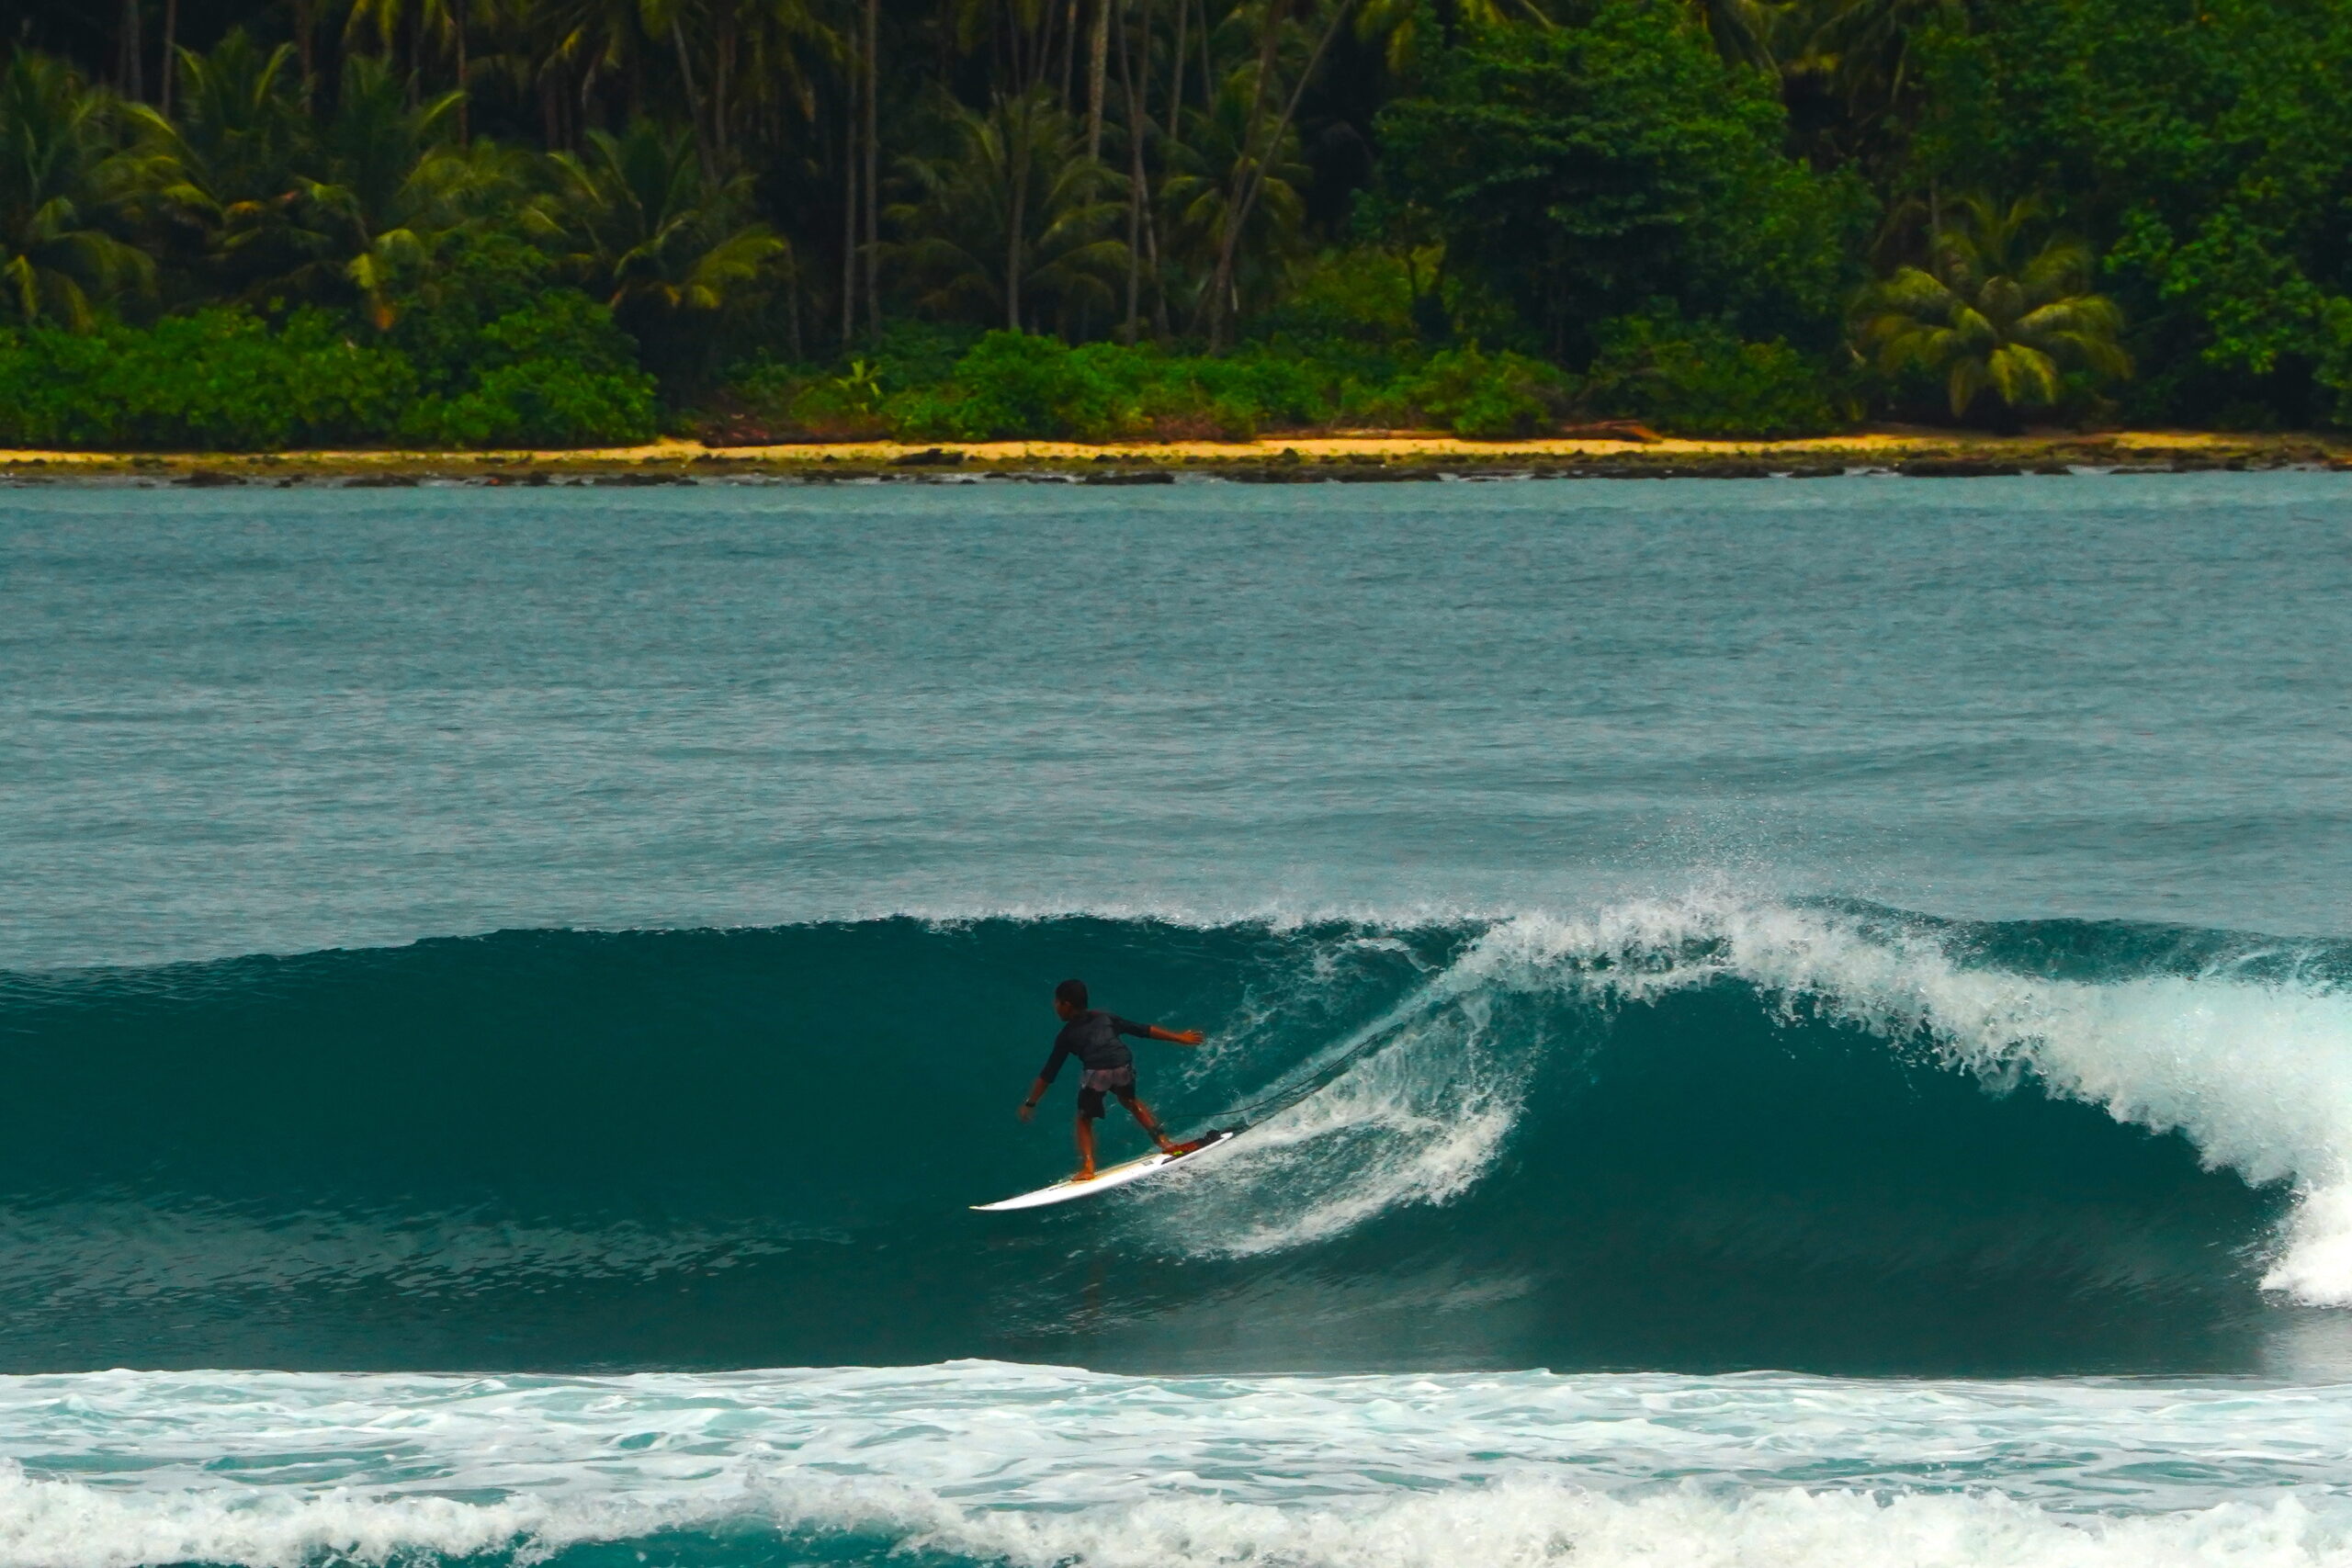 A Legendary Grom from Nias Joins the Audible World, Thanks to Surfers